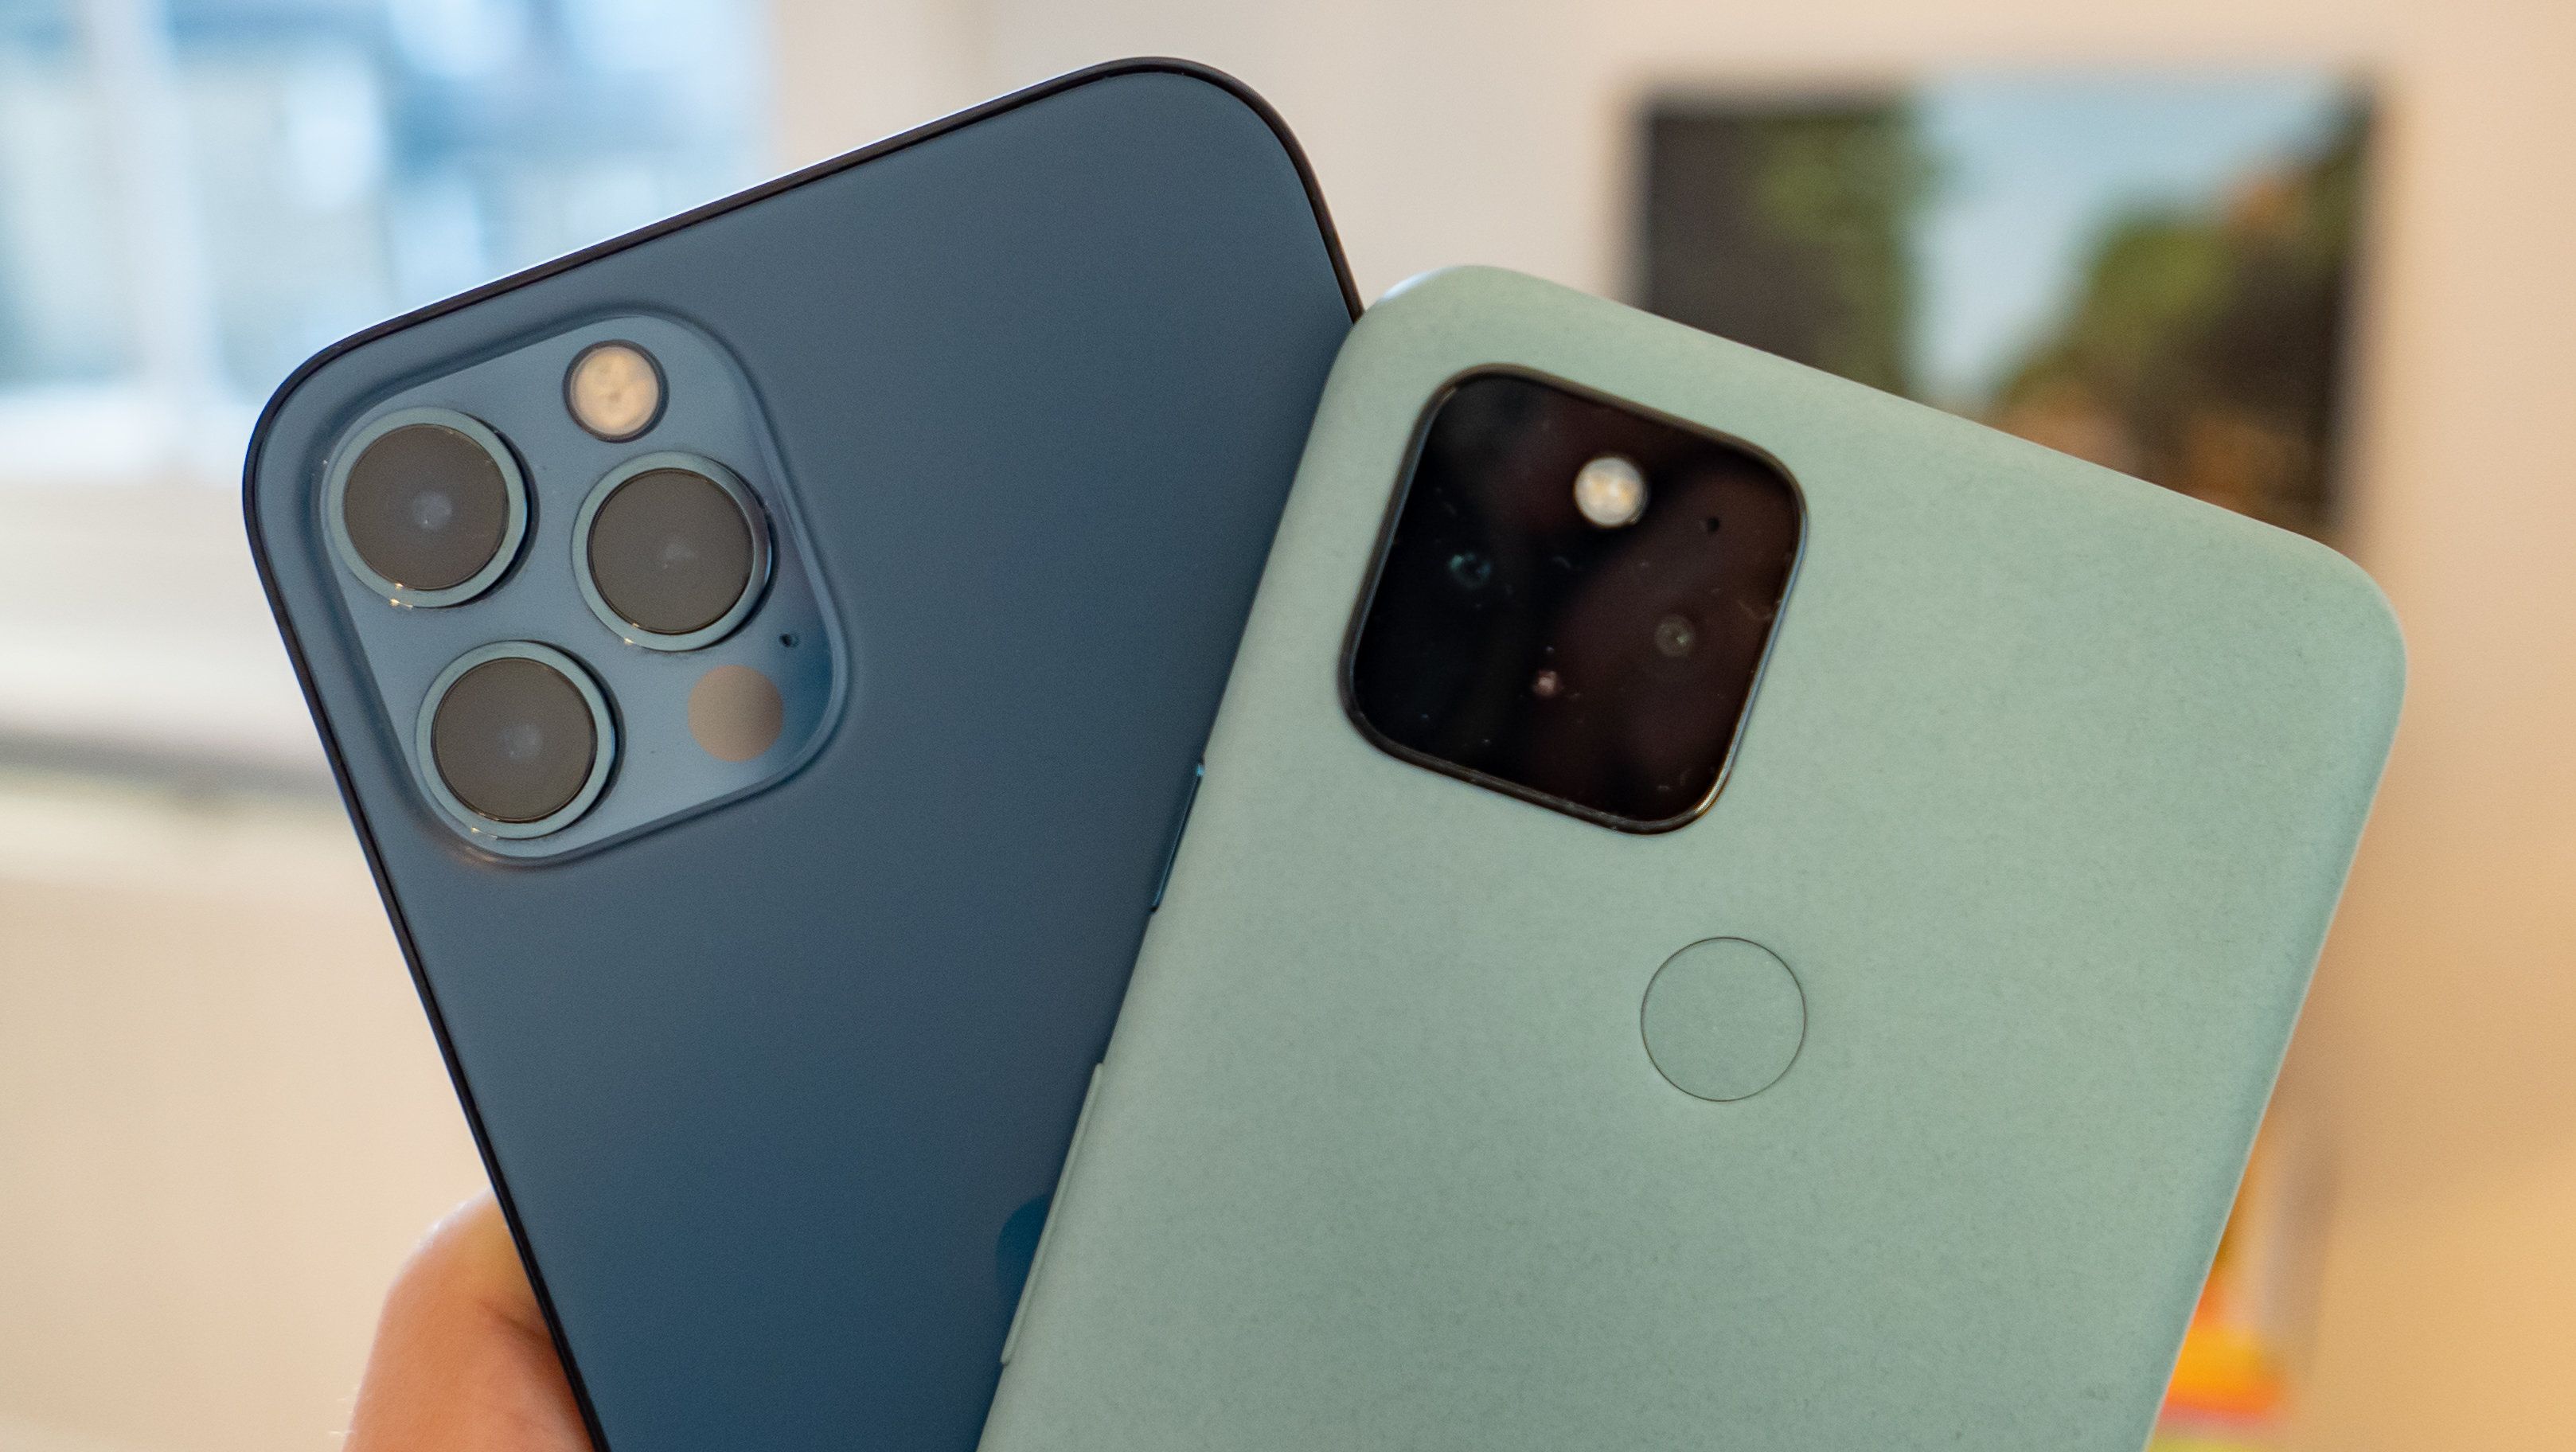 Google Pixel 5 review: A smartphone lesson in simplicity - Gearbrain